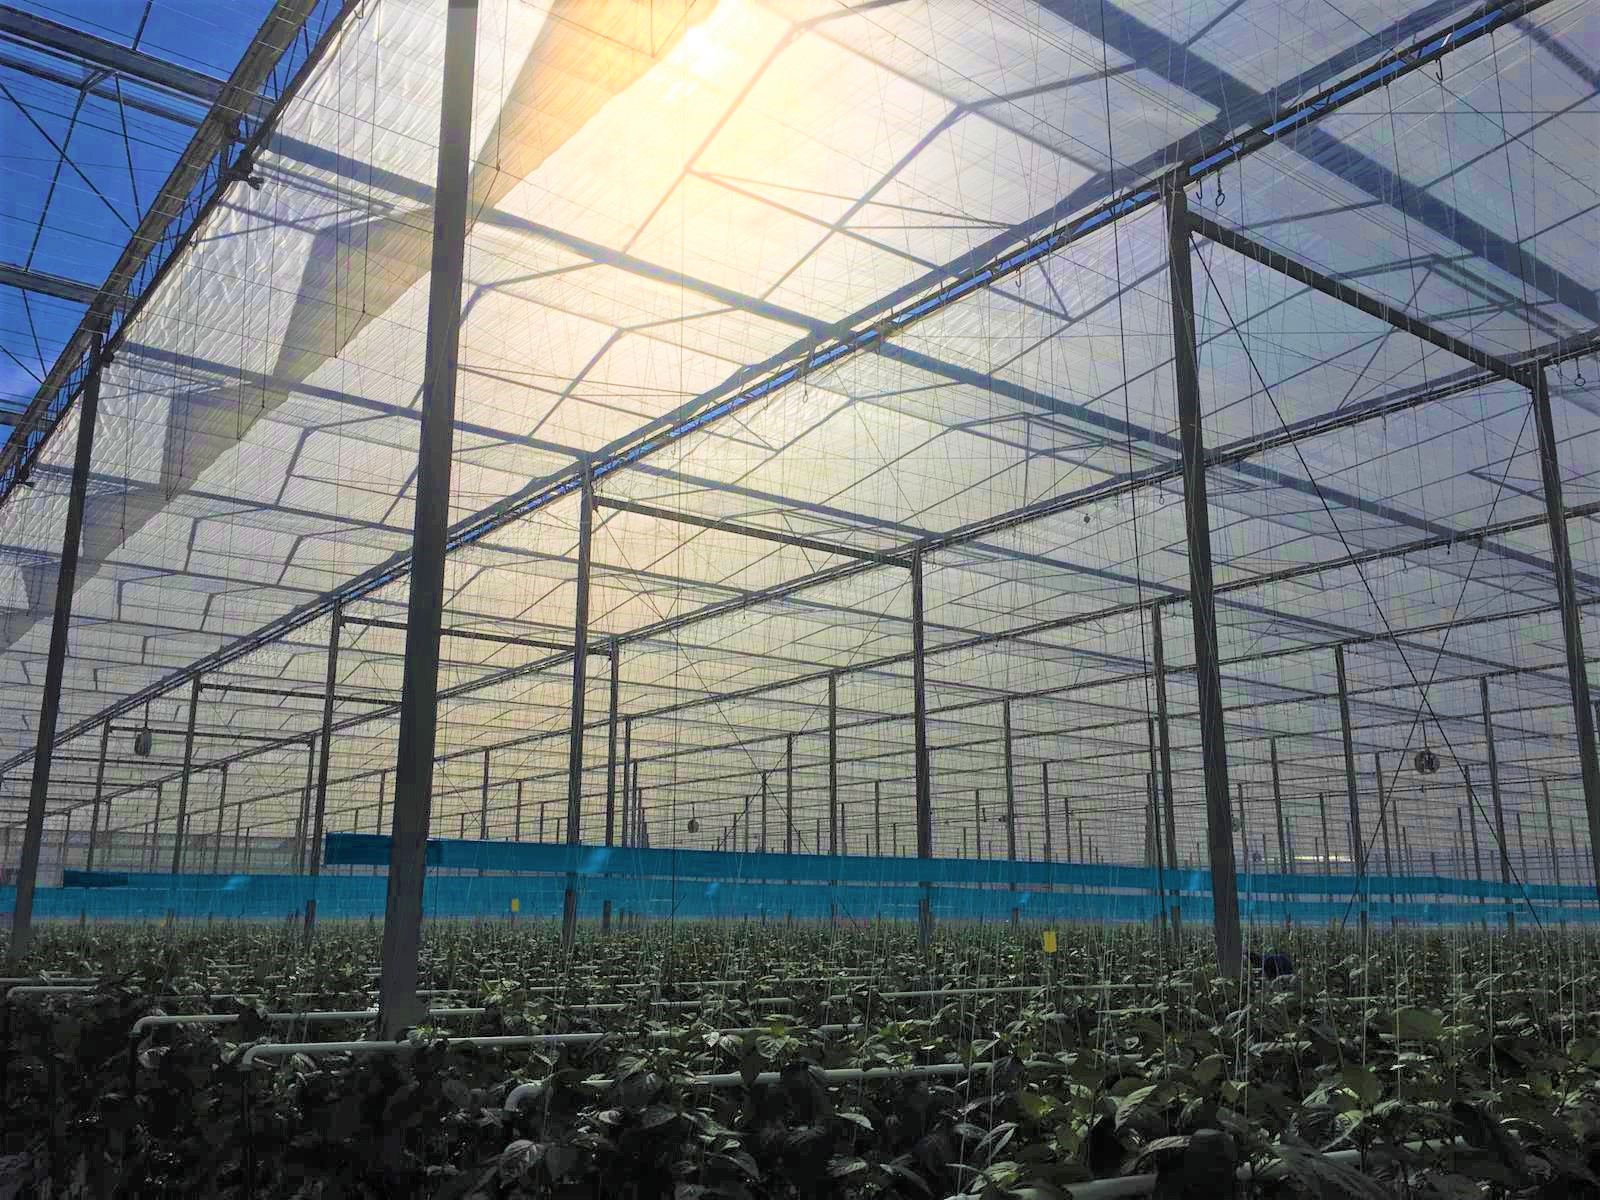 ABOVE With peppers being more sensitive to light, Allegro Acres has seen a greater need to use energy curtains in the early part of the year.